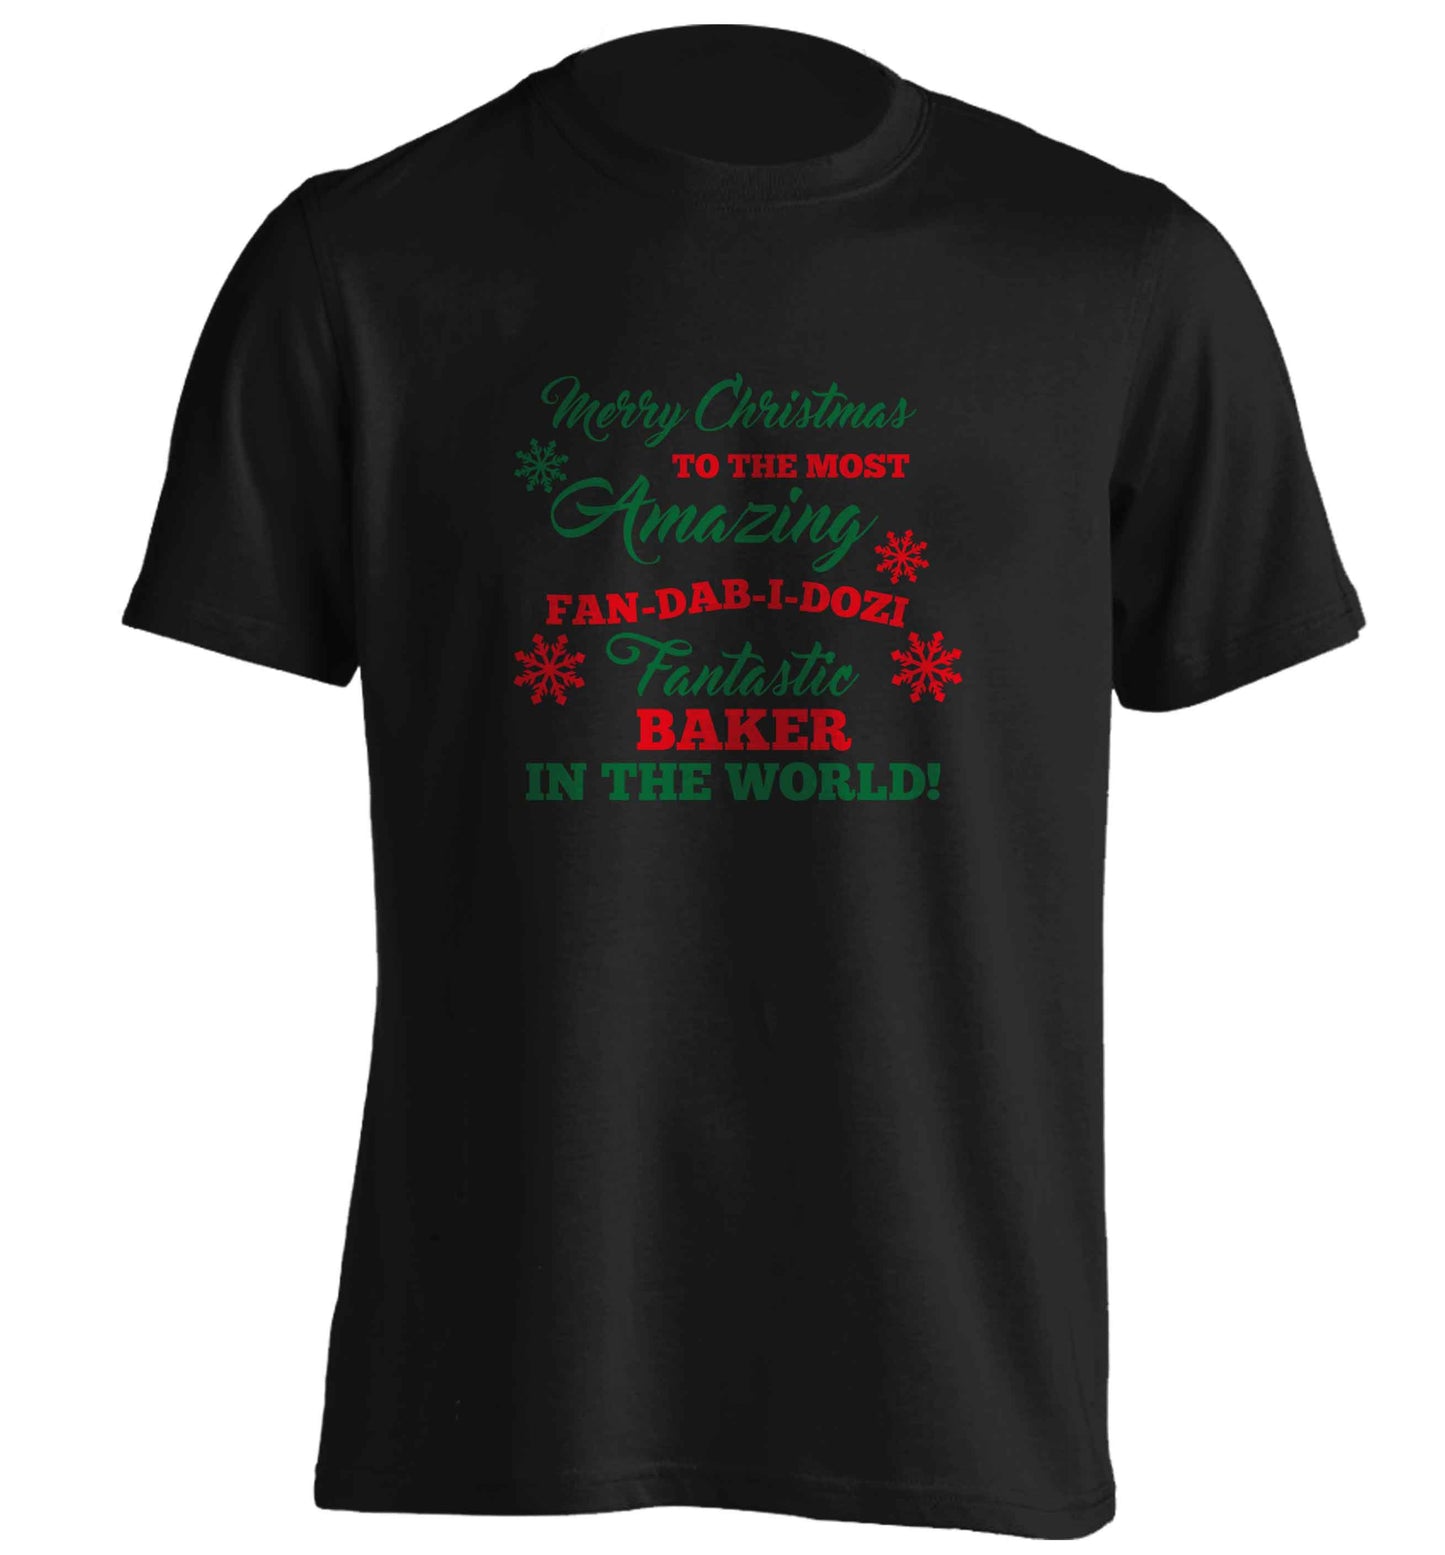 Merry Christmas to the most amazing baker in the world! adults unisex black Tshirt 2XL